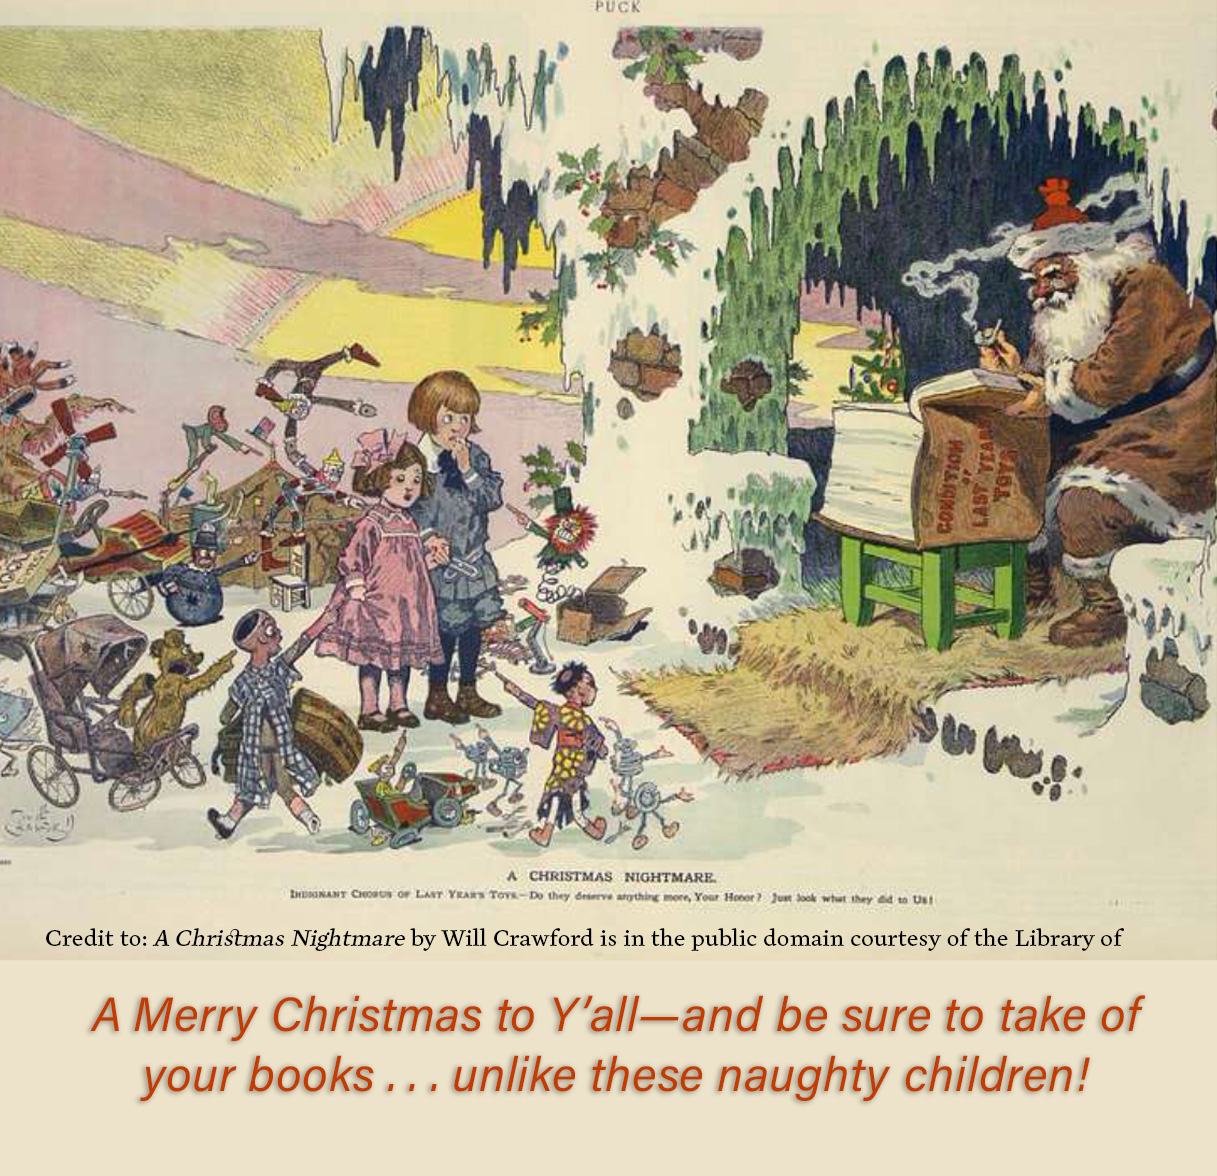 Have a Merry Bookish Christmas!